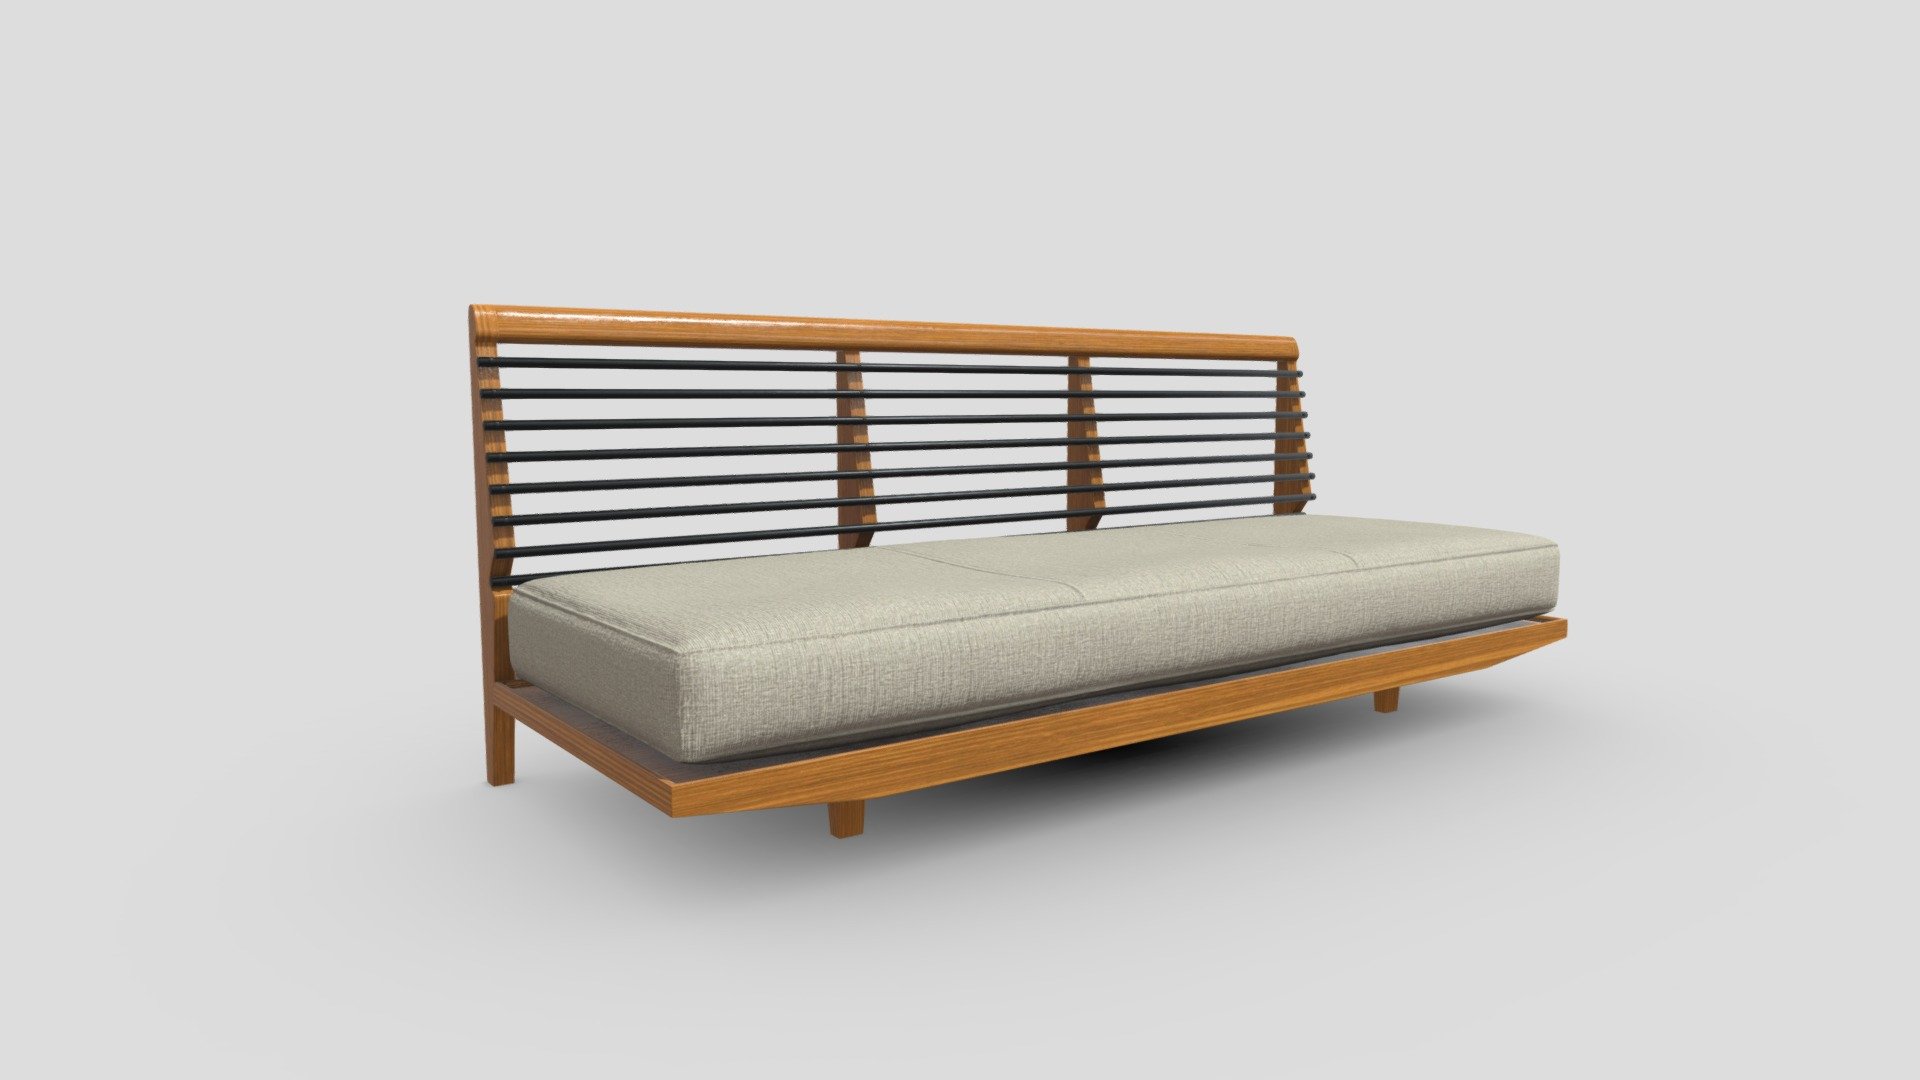 3d model of a mid-century modern-style sofa with beige fabric upholstery



Use: Game and architectural visualization ready

File formats included in zip file: .fbx

Download size: 57MB

Geometry: Triangles 60.1k, Vertices 30.3k

Materials: PBR (1)

Textures: 4K textures (5)

Image formats: png (5)

Made with Blender and Substance 3D Painter
 - Replica of a mid-century modern sofa - Buy Royalty Free 3D model by Inga Afanasyeva (@Inga.Afanasyeva) 3d model